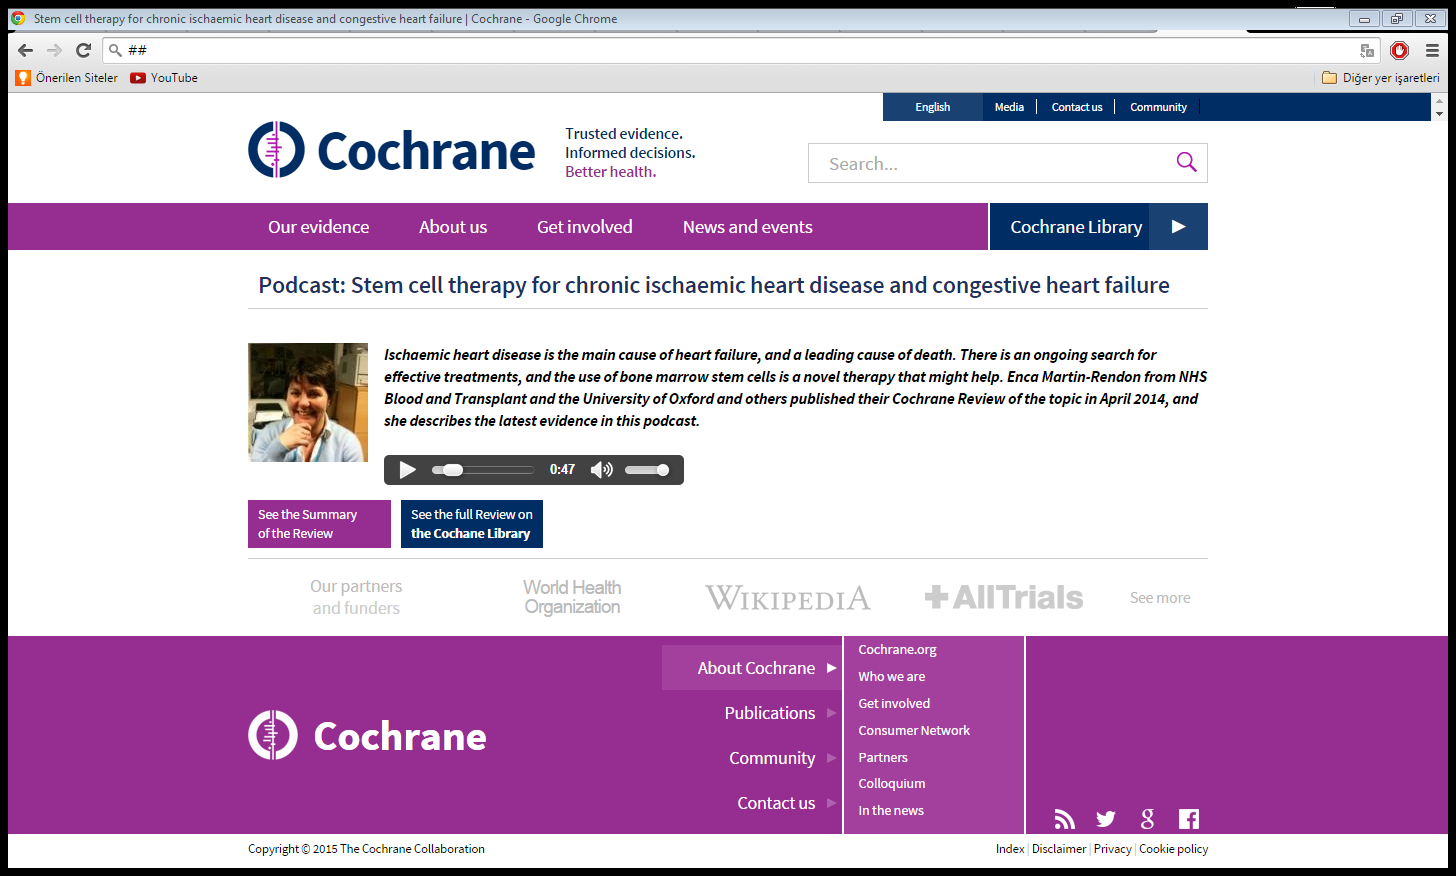 Podcast http://www.cochrane.org/podcasts/10.1002/14651858.cd007888.